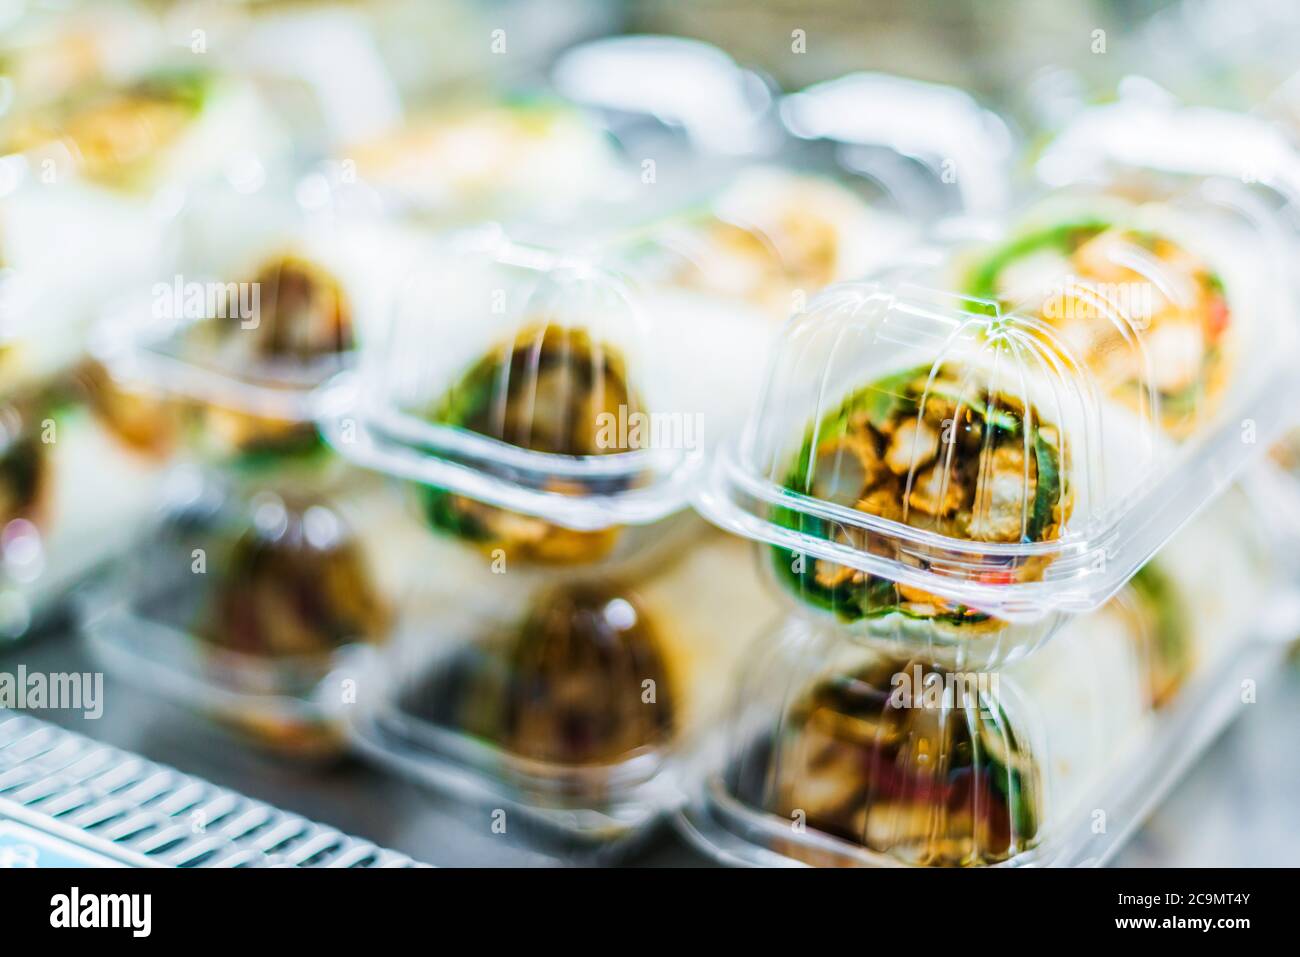 Pre-packaged sandwiches displayed in a commercial refrigerator Stock Photo